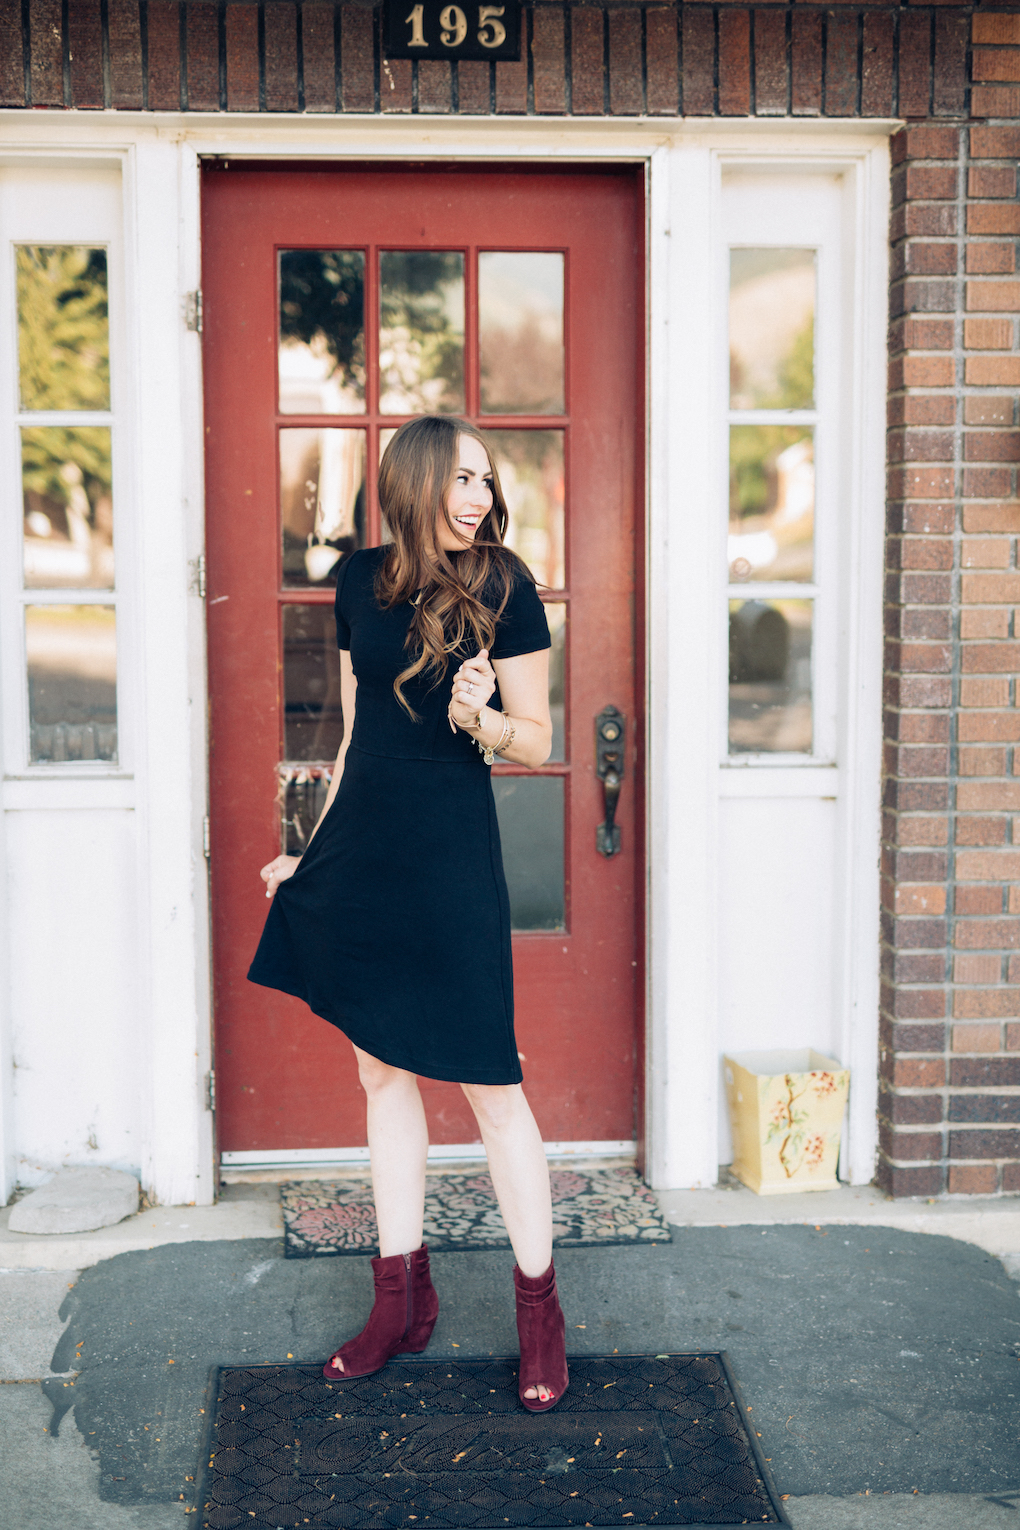 Girl with long brown hair wearing black madewell dress and maroon wedges looking over her shoulder